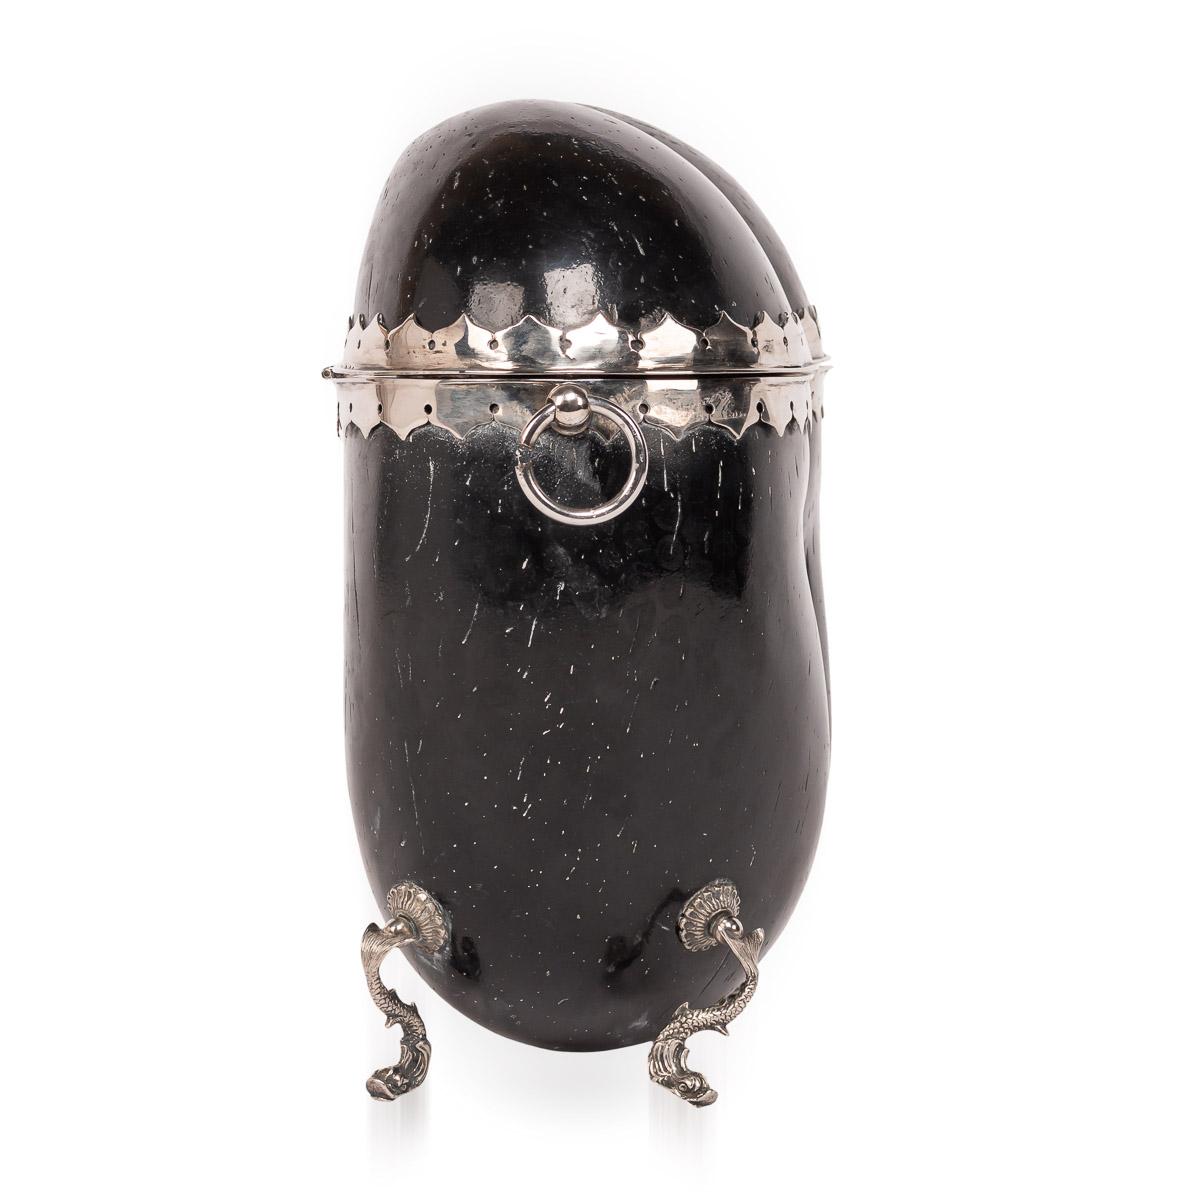 Antique 19th century Victorian rare tea caddy fashioned from a coco de mer nut with silver plated mounts. The nut itself derived from the Seychelles in the late 19th century and the silver plated mounts applied to it by a skilled silversmith in